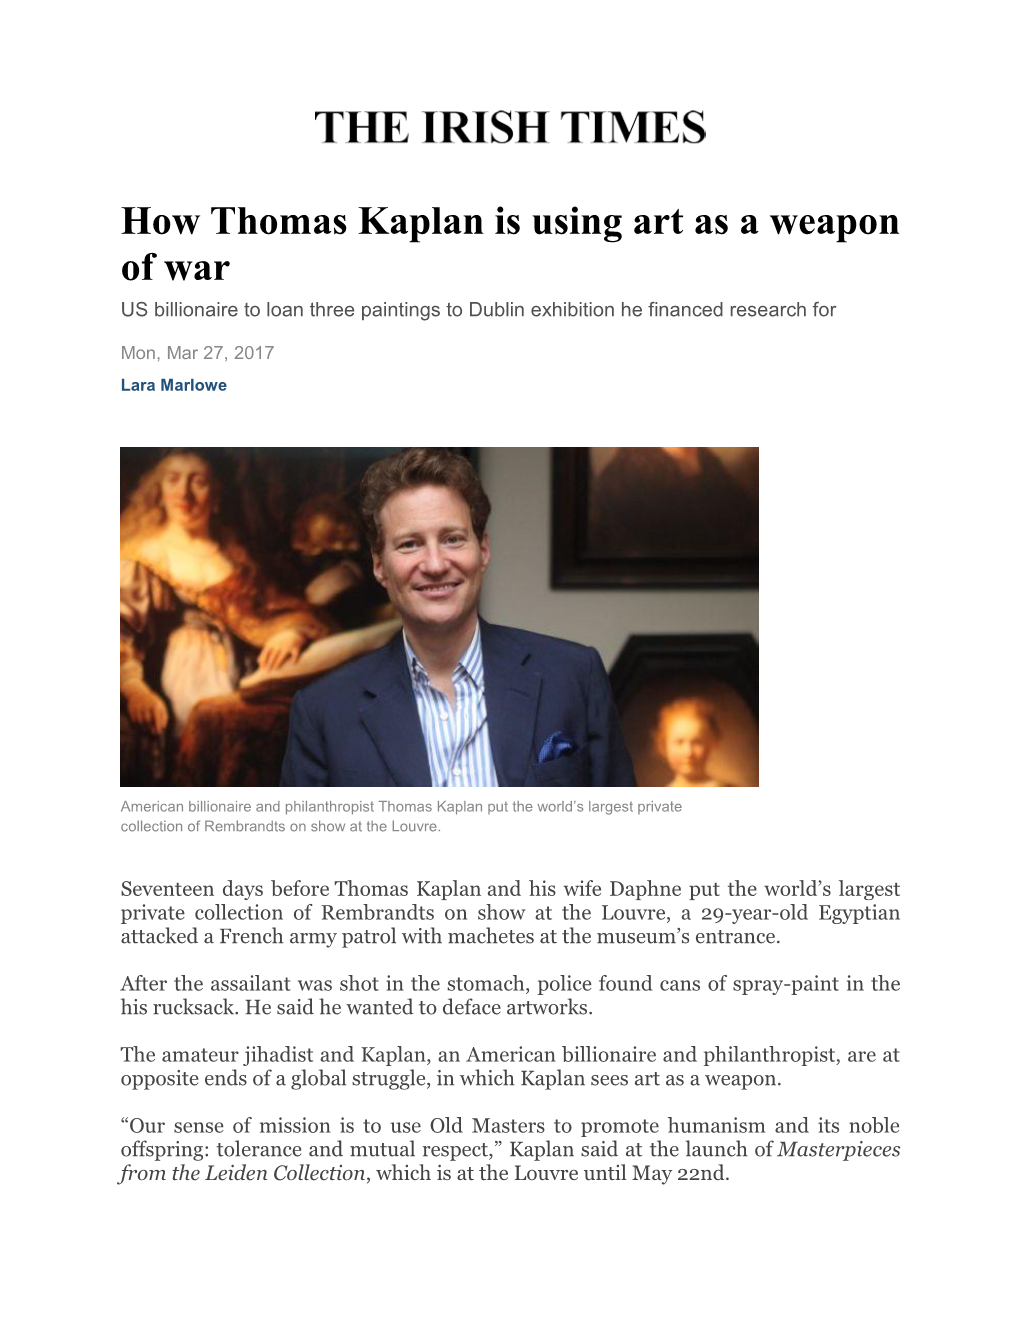 How Thomas Kaplan Is Using Art As a Weapon of War US Billionaire to Loan Three Paintings to Dublin Exhibition He Financed Research For